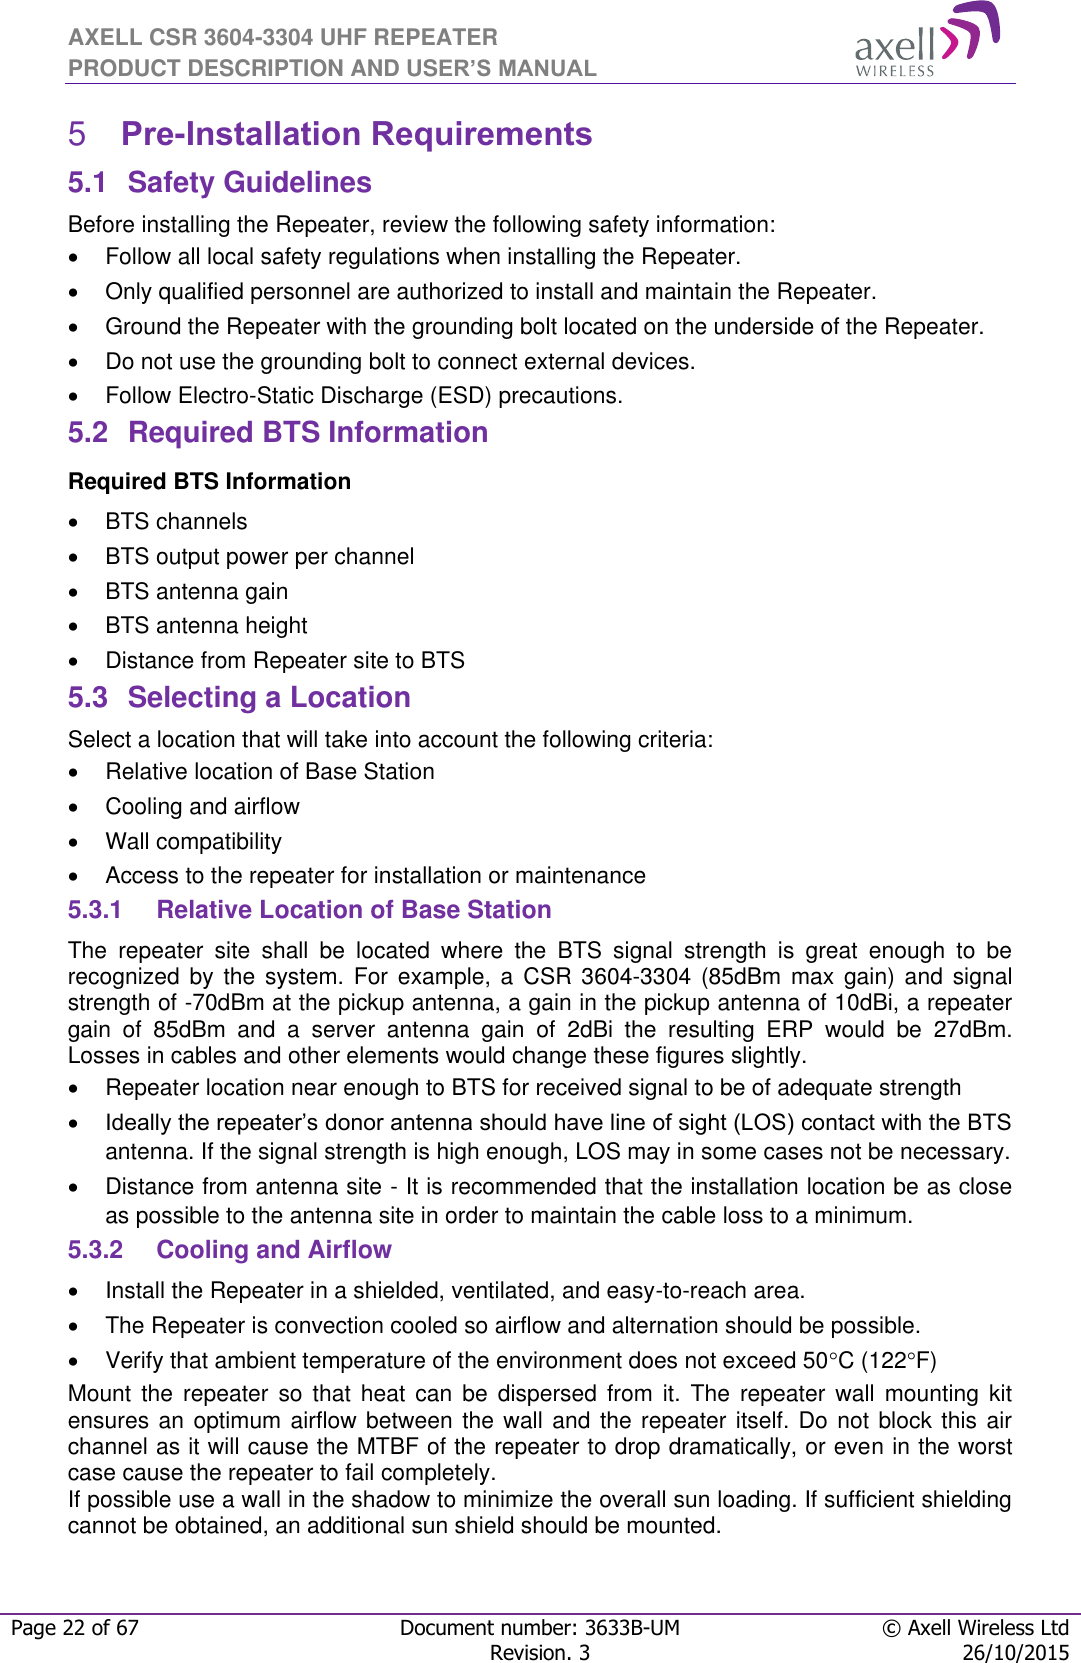 AXELL CSR 3604-3304 UHF REPEATER PRODUCT DESCRIPTION AND USER’S MANUAL  Page 22 of 67 Document number: 3633B-UM © Axell Wireless Ltd  Revision. 3 26/10/2015   Pre-Installation Requirements 55.1  Safety Guidelines Before installing the Repeater, review the following safety information:    Follow all local safety regulations when installing the Repeater.   Only qualified personnel are authorized to install and maintain the Repeater.   Ground the Repeater with the grounding bolt located on the underside of the Repeater.   Do not use the grounding bolt to connect external devices.   Follow Electro-Static Discharge (ESD) precautions. 5.2  Required BTS Information Required BTS Information   BTS channels   BTS output power per channel   BTS antenna gain   BTS antenna height    Distance from Repeater site to BTS 5.3  Selecting a Location Select a location that will take into account the following criteria:   Relative location of Base Station   Cooling and airflow   Wall compatibility   Access to the repeater for installation or maintenance 5.3.1  Relative Location of Base Station The  repeater  site  shall  be  located  where  the  BTS  signal  strength  is  great  enough  to  be recognized  by  the system.  For  example,  a  CSR 3604-3304  (85dBm  max  gain)  and  signal strength of -70dBm at the pickup antenna, a gain in the pickup antenna of 10dBi, a repeater gain  of  85dBm  and  a  server  antenna  gain  of  2dBi  the  resulting  ERP  would  be  27dBm. Losses in cables and other elements would change these figures slightly.    Repeater location near enough to BTS for received signal to be of adequate strength  Ideally the repeater’s donor antenna should have line of sight (LOS) contact with the BTS antenna. If the signal strength is high enough, LOS may in some cases not be necessary.   Distance from antenna site - It is recommended that the installation location be as close as possible to the antenna site in order to maintain the cable loss to a minimum. 5.3.2  Cooling and Airflow   Install the Repeater in a shielded, ventilated, and easy-to-reach area.   The Repeater is convection cooled so airflow and alternation should be possible.   Verify that ambient temperature of the environment does not exceed 50C (122F) Mount  the  repeater  so  that  heat  can  be  dispersed  from  it.  The  repeater  wall  mounting  kit ensures an optimum airflow between the wall and the repeater itself. Do not block this  air channel as it will cause the MTBF of the repeater to drop dramatically, or even in the worst case cause the repeater to fail completely.  If possible use a wall in the shadow to minimize the overall sun loading. If sufficient shielding cannot be obtained, an additional sun shield should be mounted.  